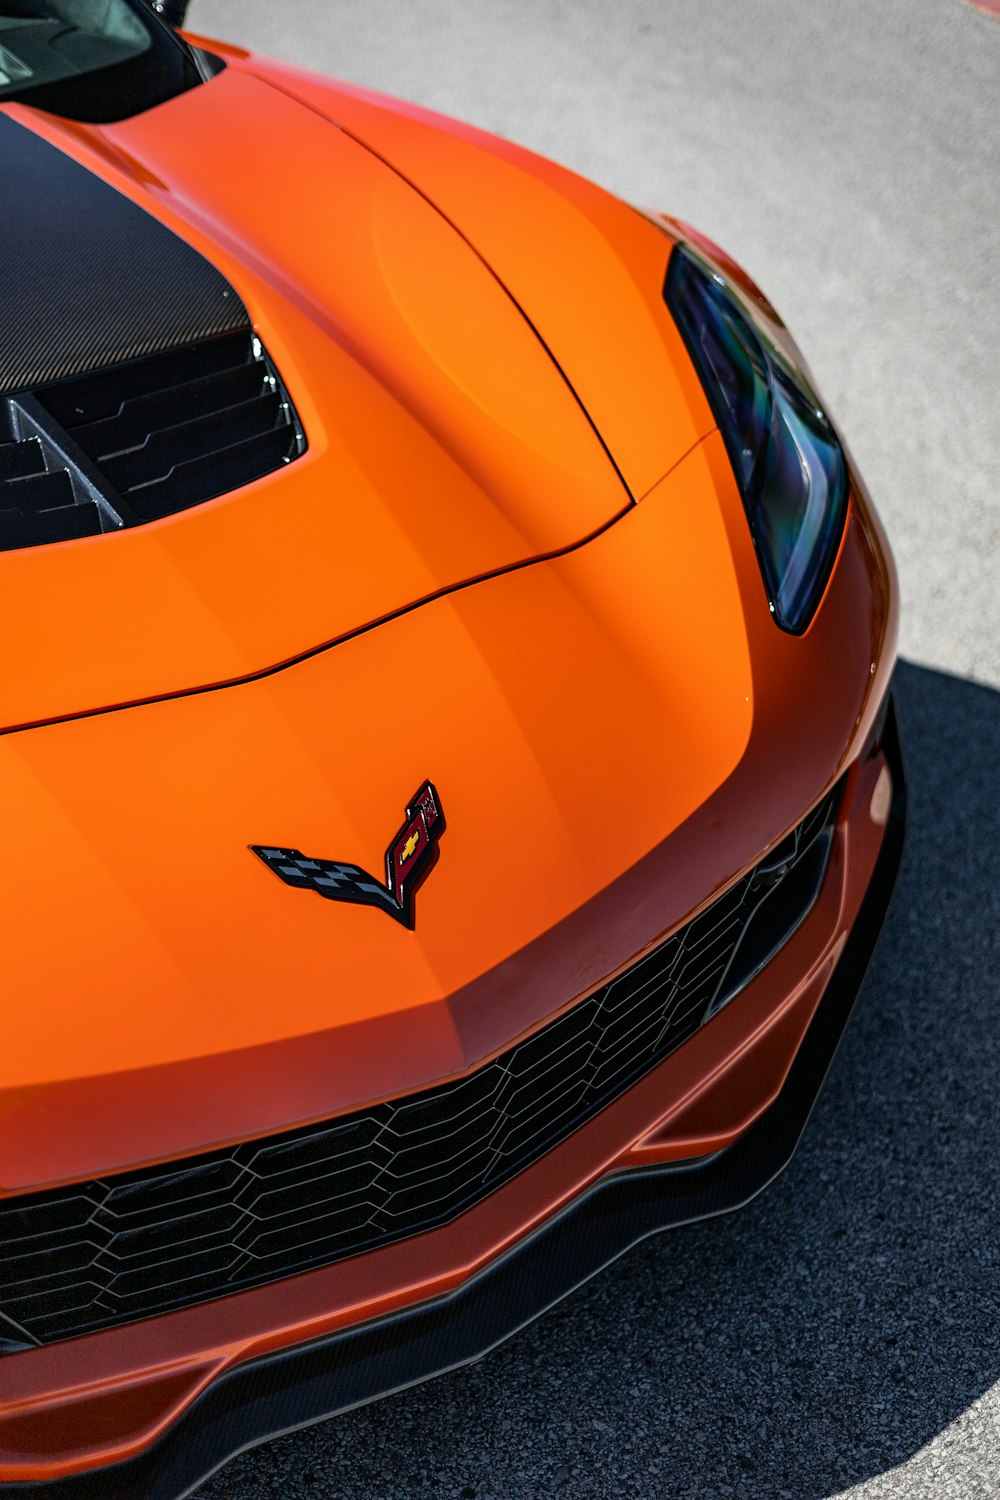 a close up of the hood of an orange sports car